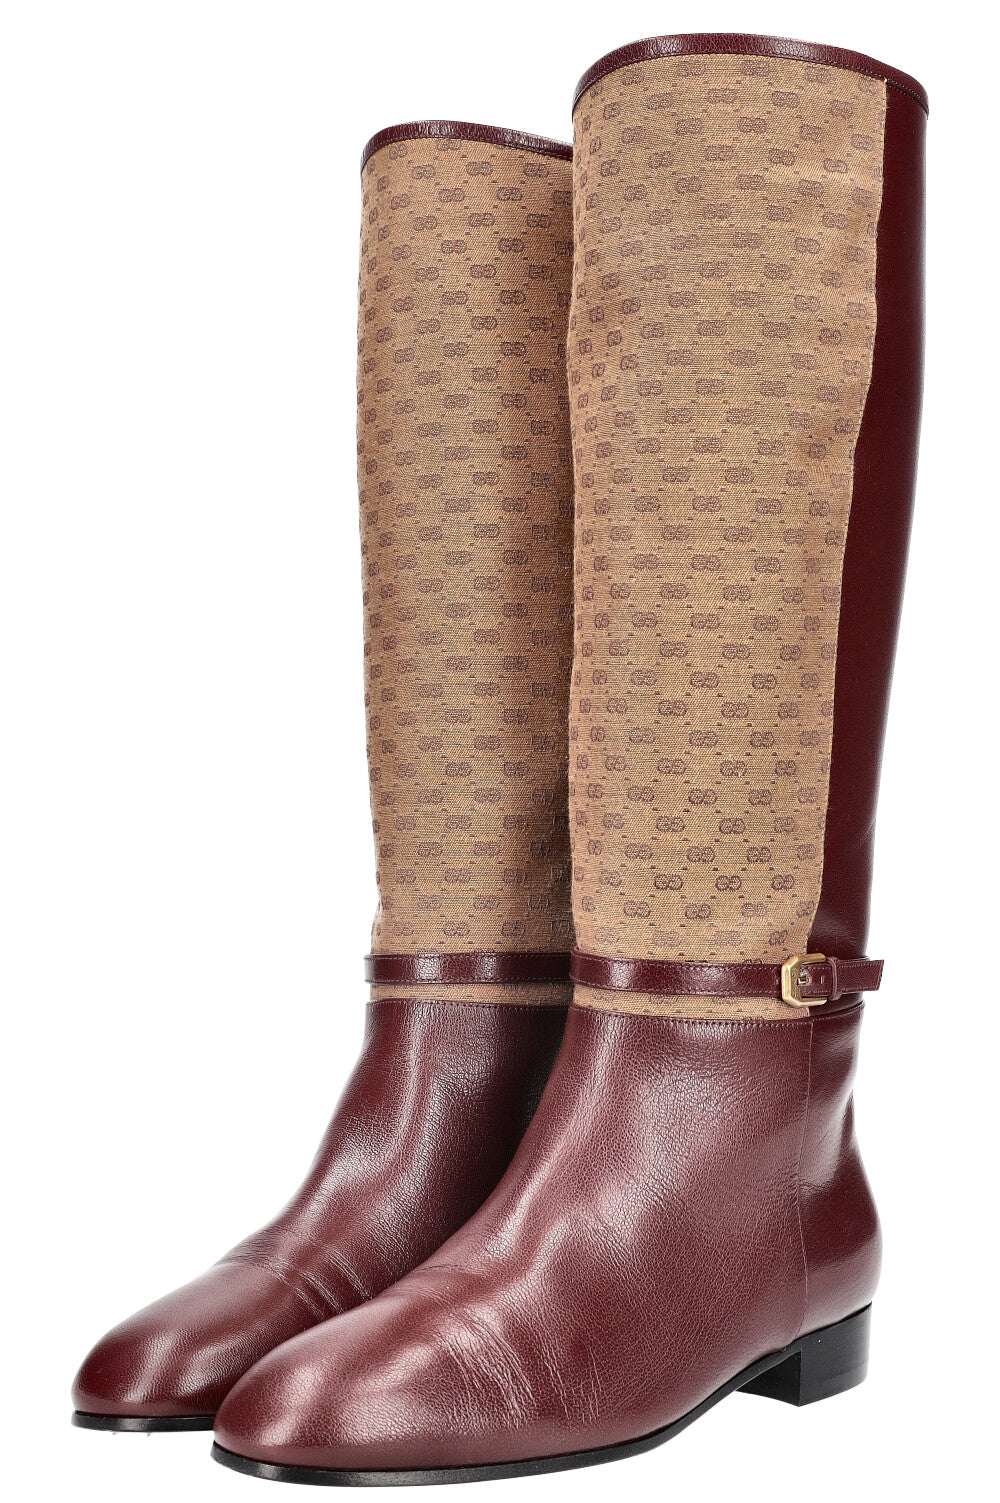 GUCCI Mini GG Canvas Leather Boots Burgundy